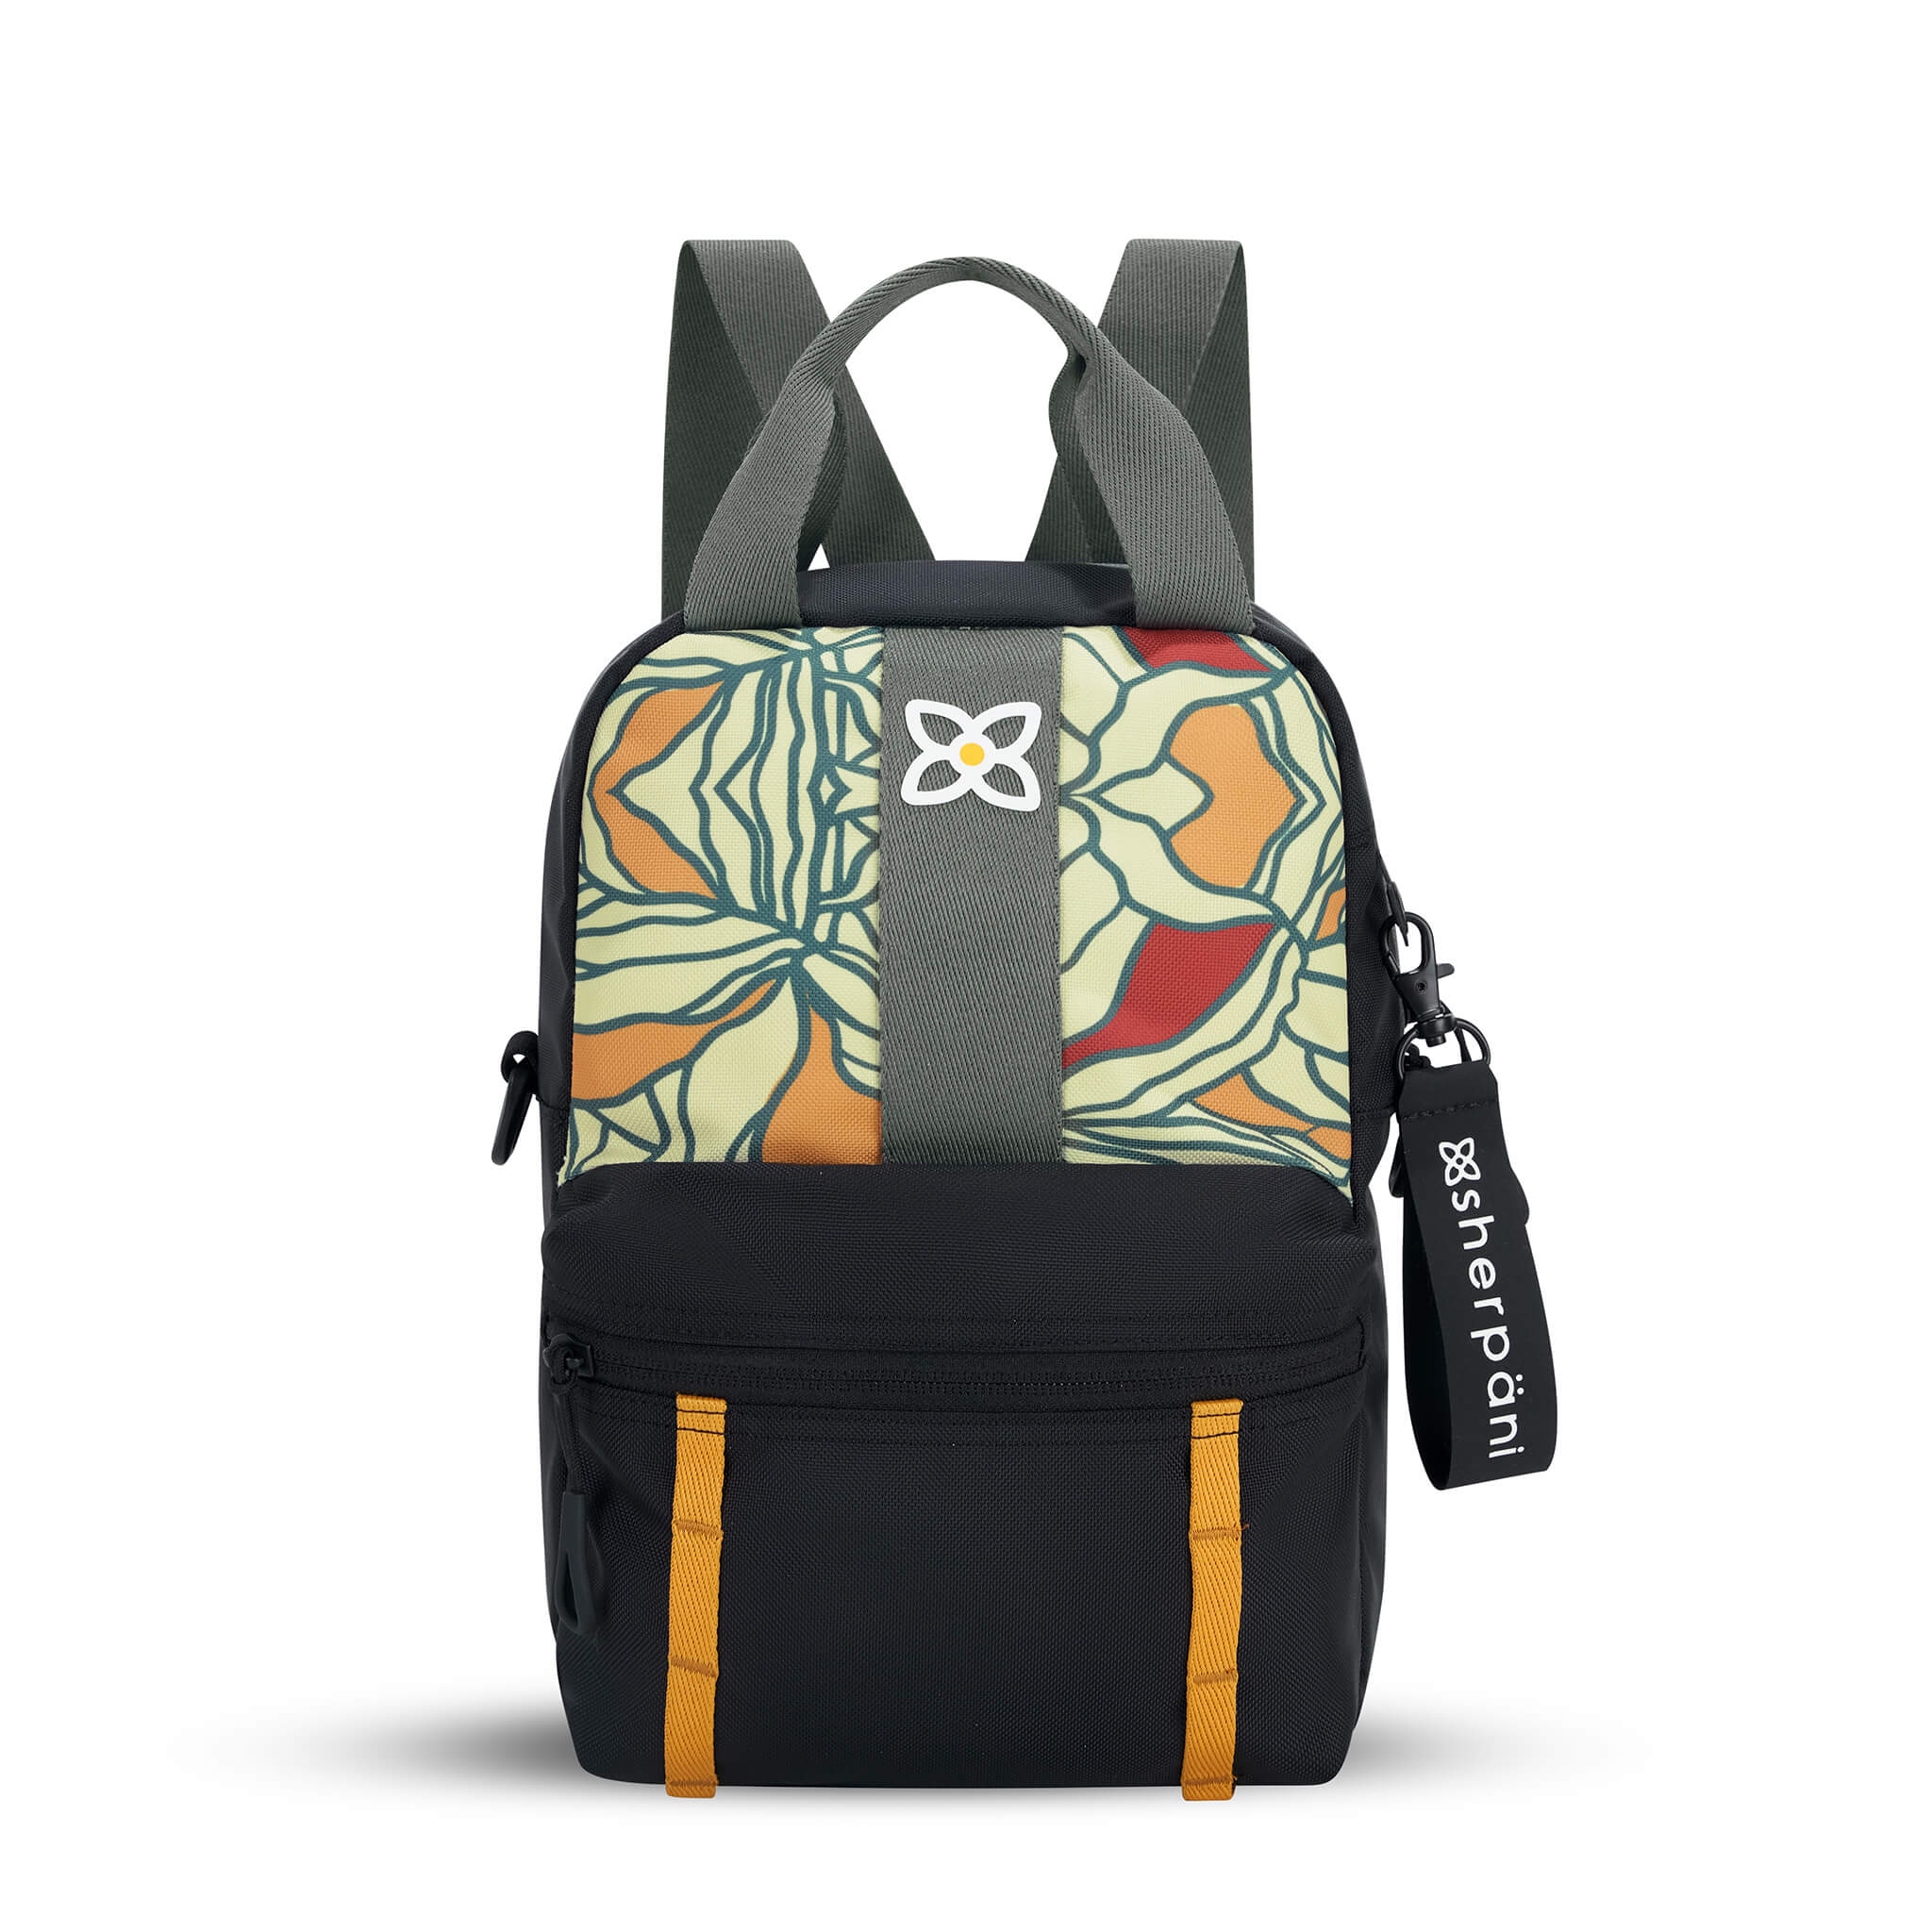 Flat front view of Sherpani mini backpack the Logan in Fiori. The bag is black and gray with an accented daisy chain in yellow. The front panel features a multi-colored floral pattern. The Logan has fixed tote handles and adjustable backpack straps. 